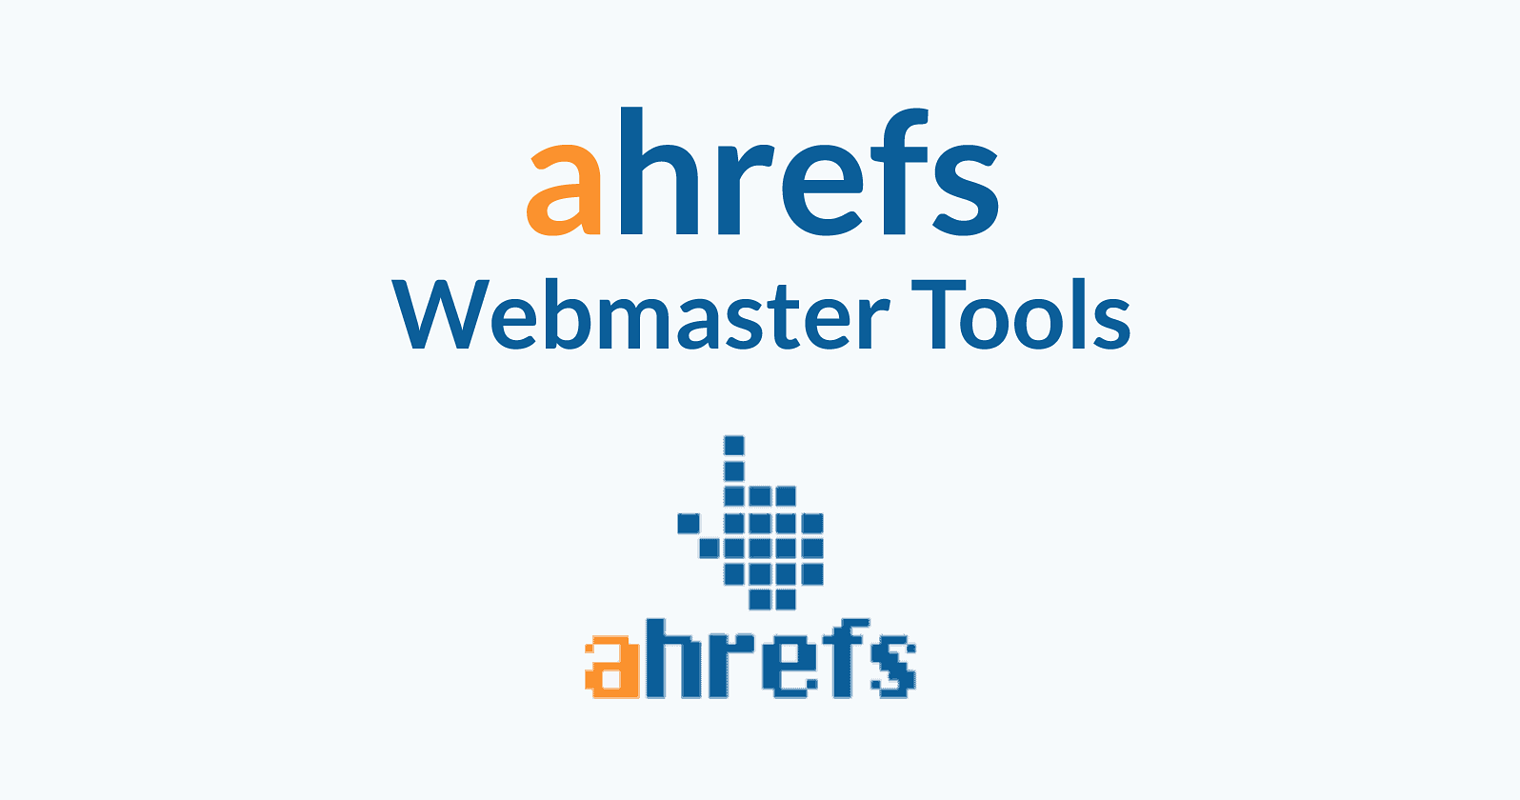 Ahrefs Webmaster Tools is Powerful… and it’s Free